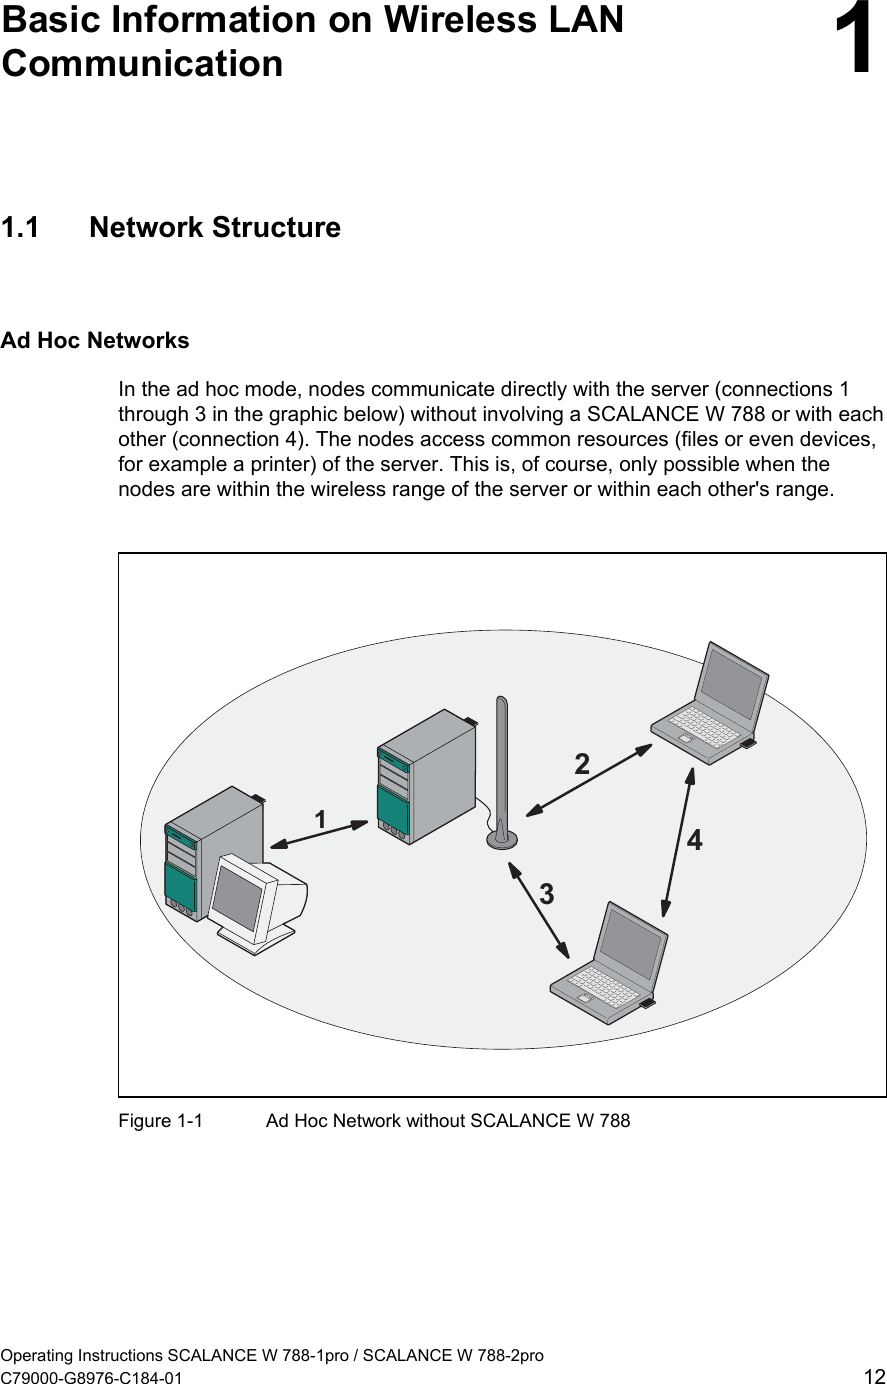   Basic Information on Wireless LAN Communication  11.1 Network Structure Ad Hoc Networks In the ad hoc mode, nodes communicate directly with the server (connections 1 through 3 in the graphic below) without involving a SCALANCE W 788 or with each other (connection 4). The nodes access common resources (files or even devices, for example a printer) of the server. This is, of course, only possible when the nodes are within the wireless range of the server or within each other&apos;s range.   1234Figure 1-1  Ad Hoc Network without SCALANCE W 788  Operating Instructions SCALANCE W 788-1pro / SCALANCE W 788-2pro C79000-G8976-C184-01  12 